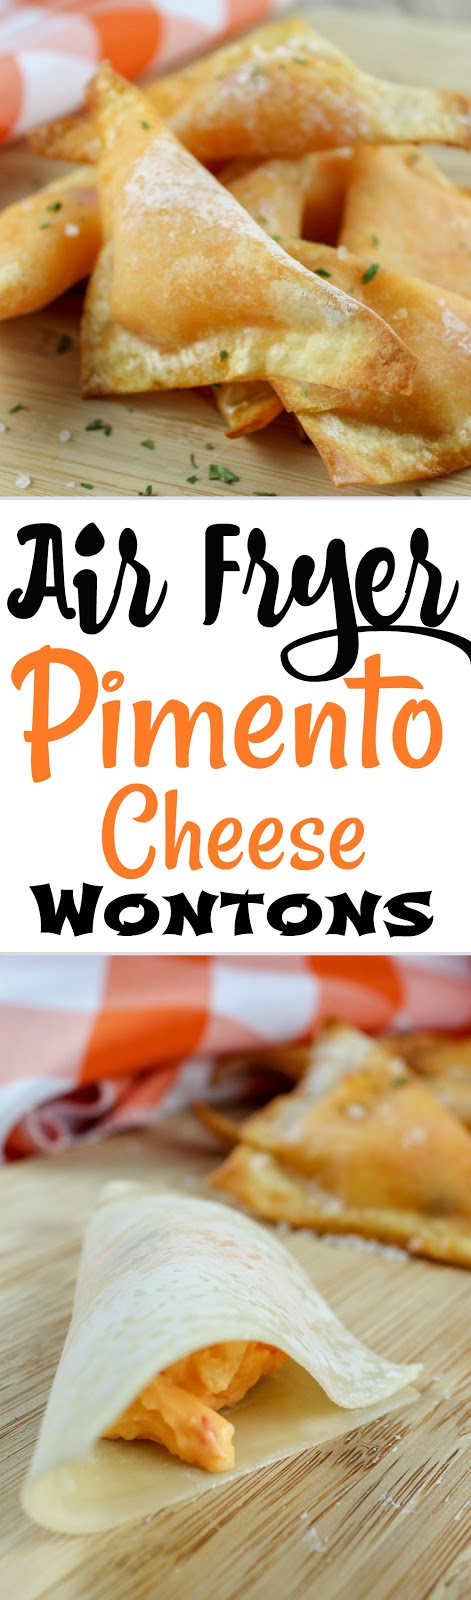 Recipe: Air Fryer Pimento Cheese Wontons - The Food Hussy